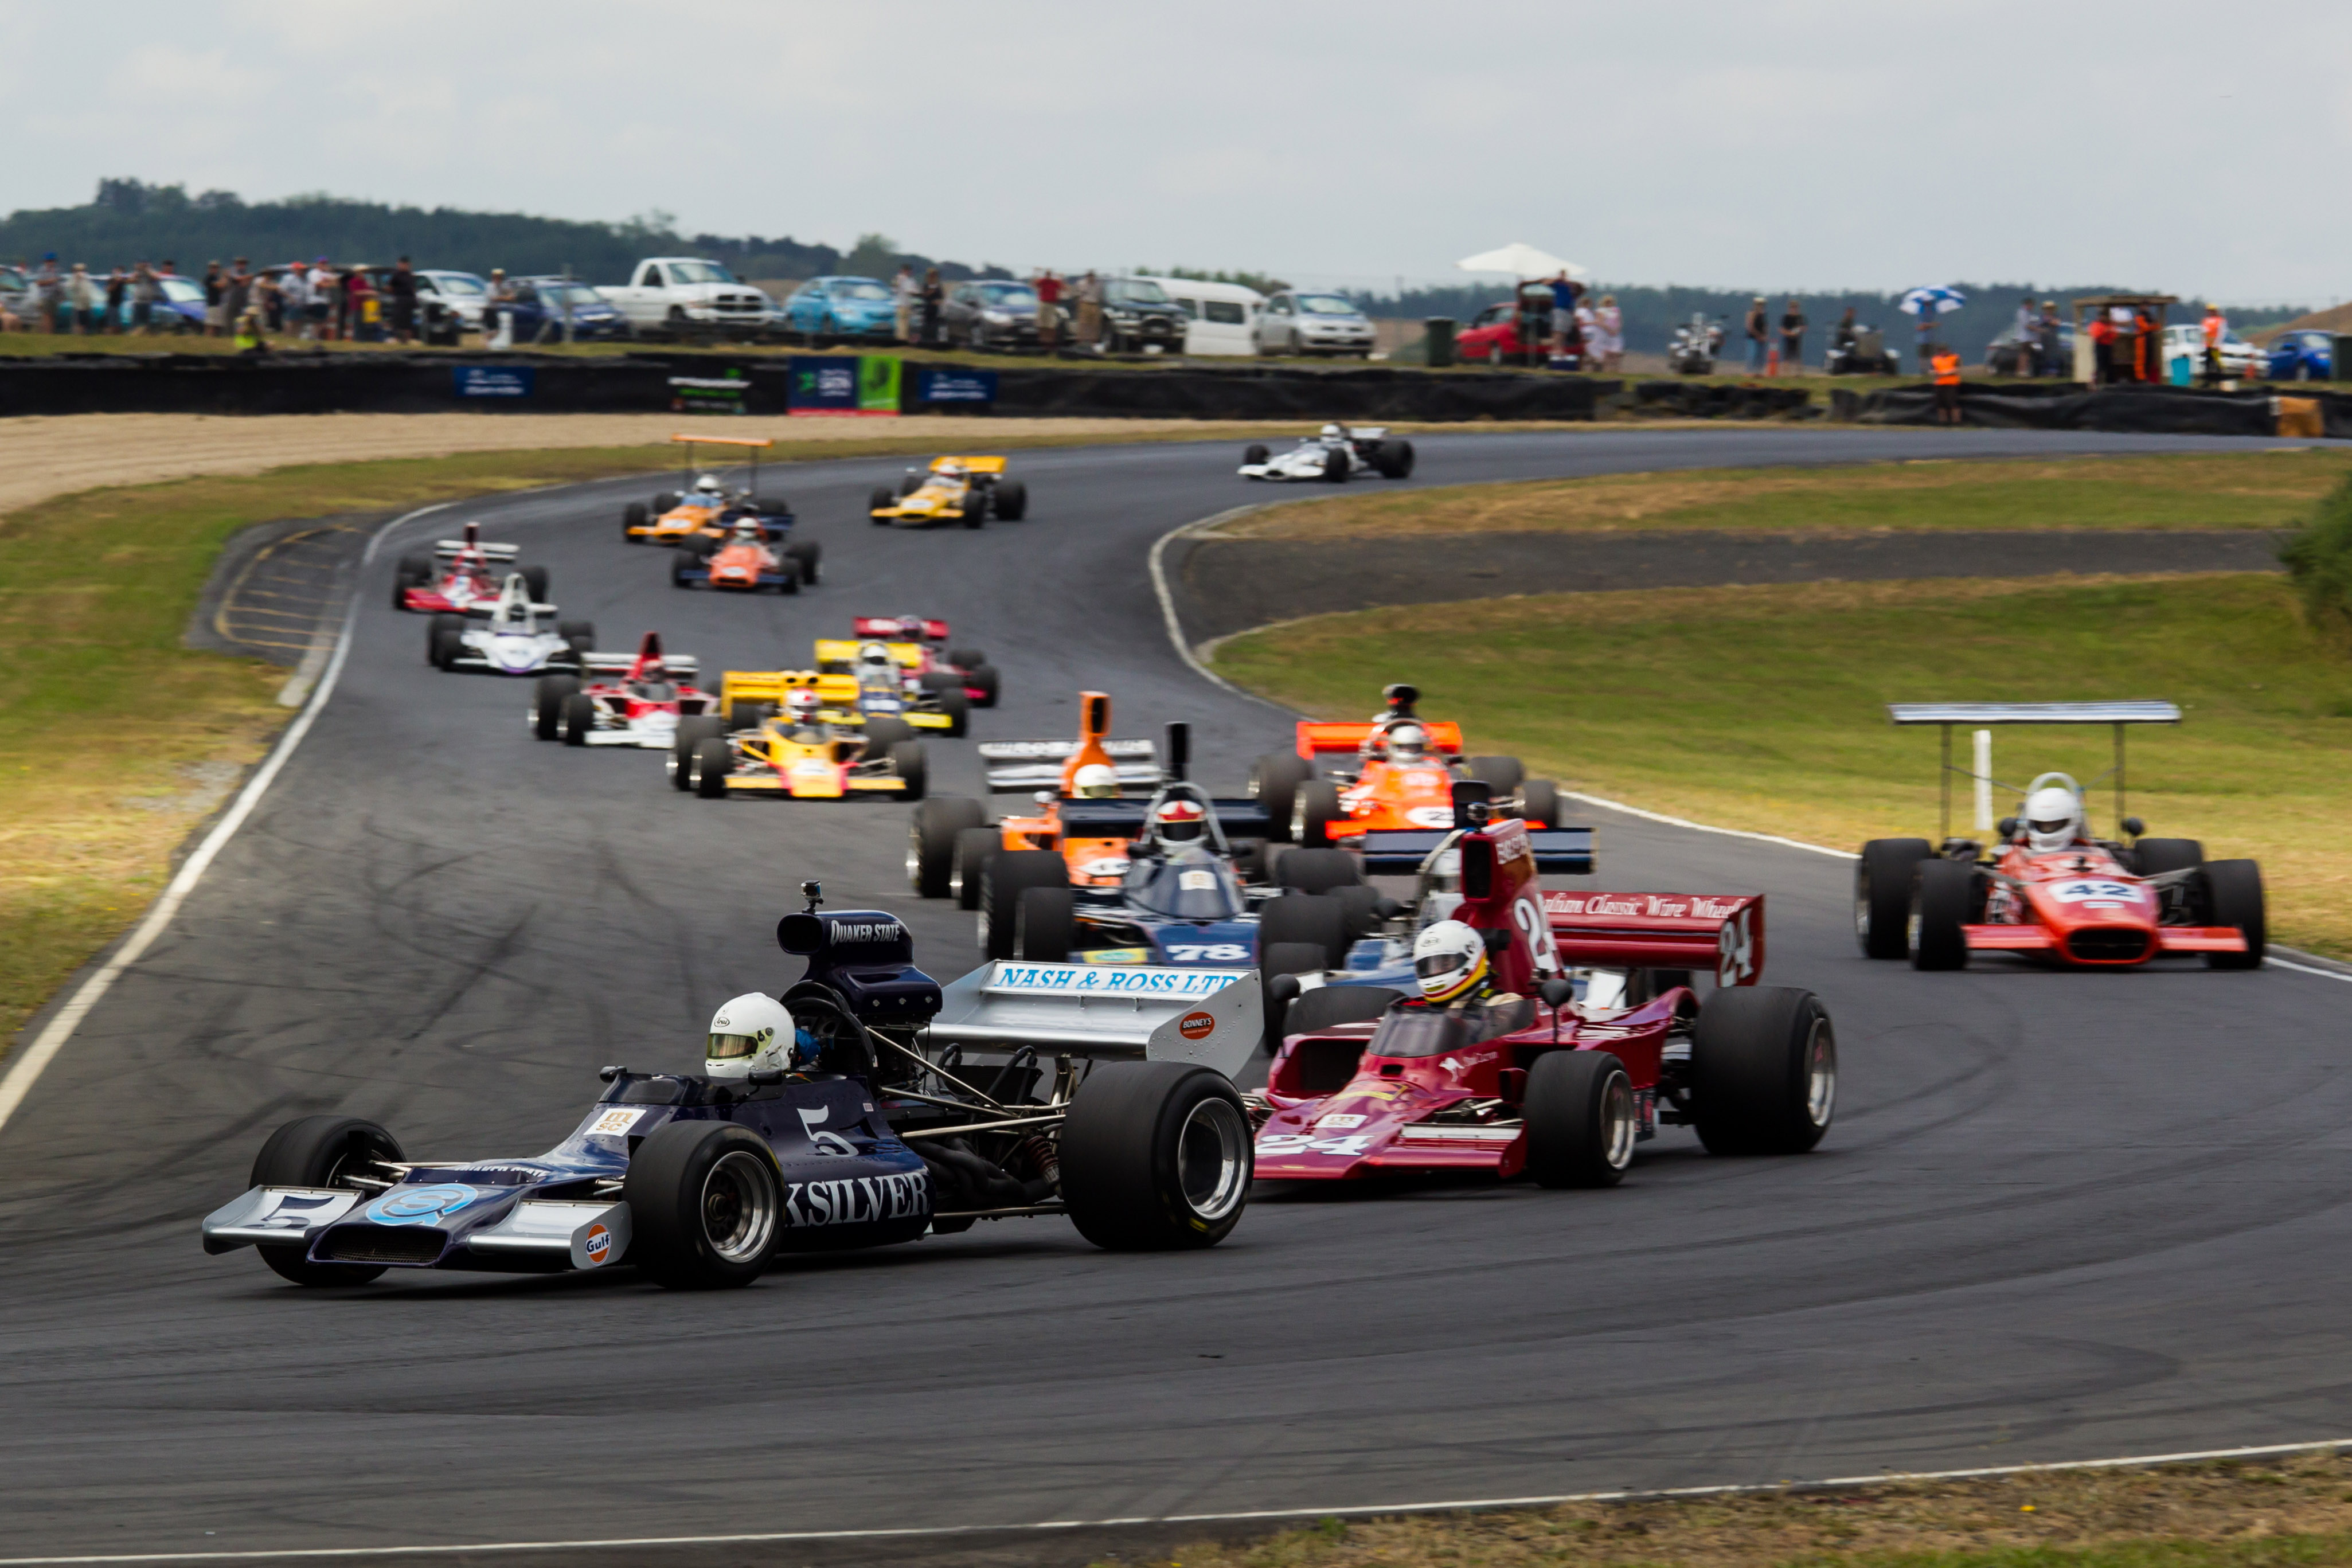 Kiwi F5000 drivers off to compete in the USA